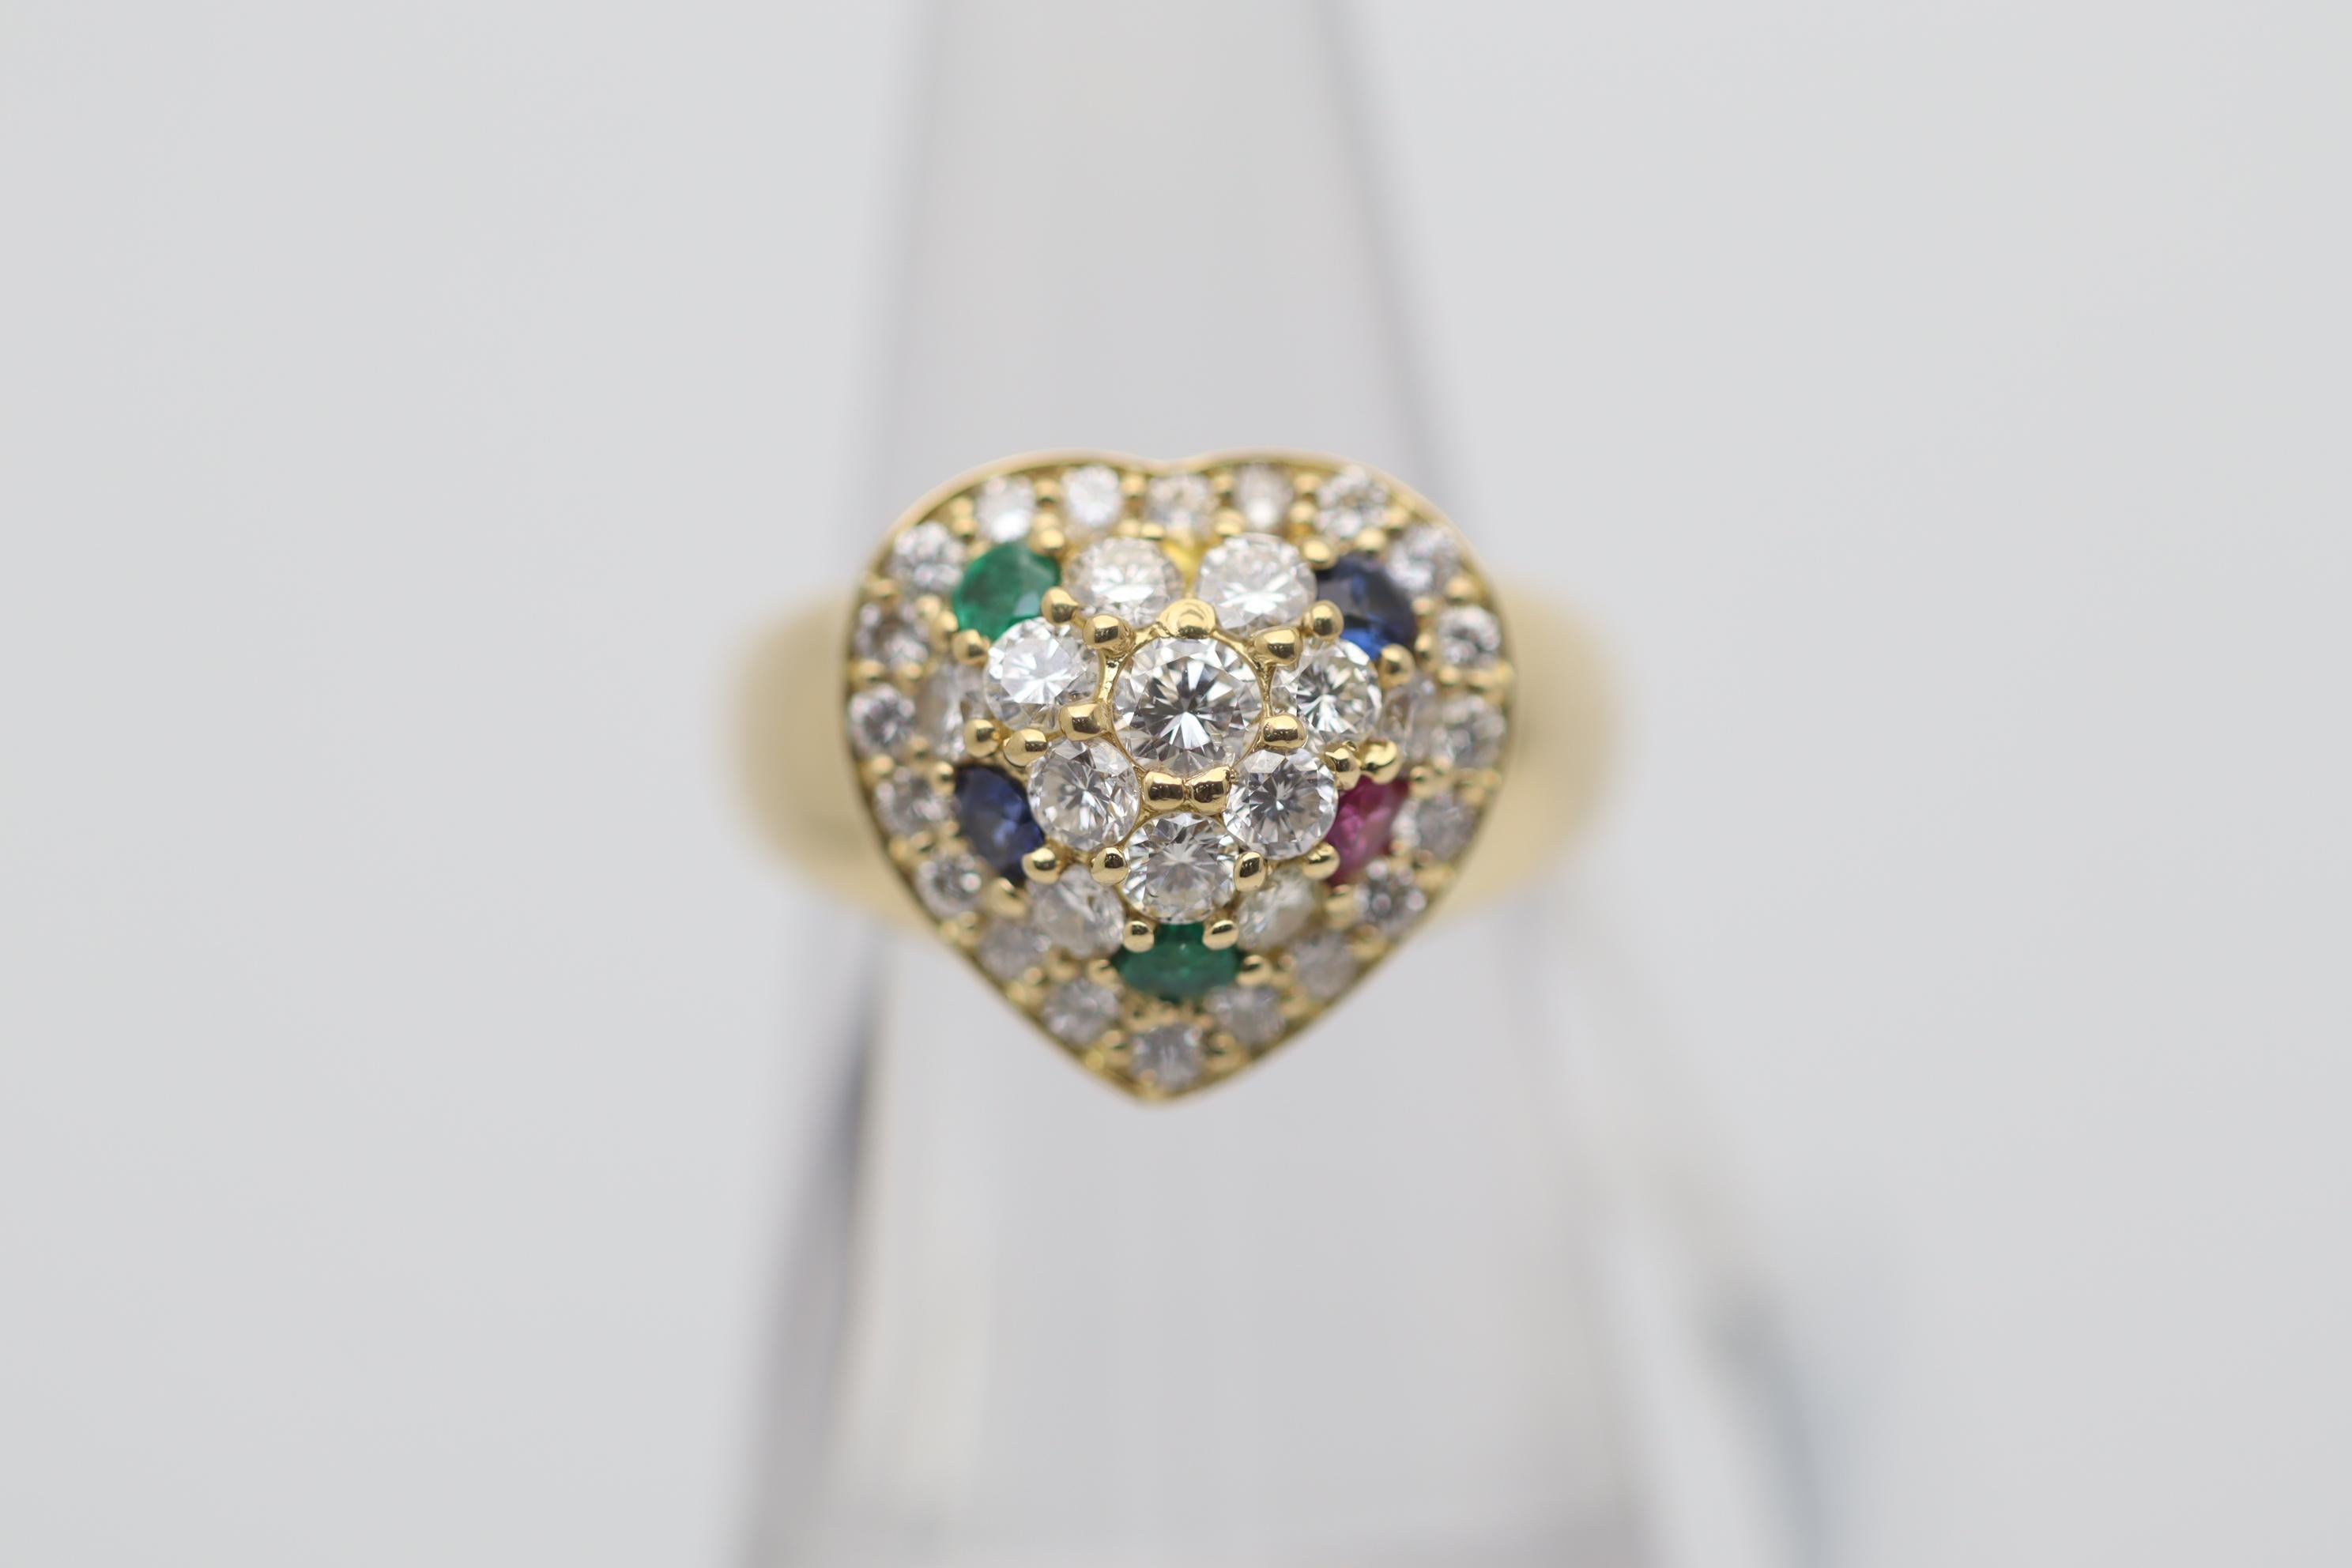 A sweet and stylish ring featuring a gold heart motif studded with diamonds and gems. The heart is studded with 1.14 carats of round brilliant-cut diamonds along with two emeralds, two sapphires, and one ruby, which add color and contrast. Made in